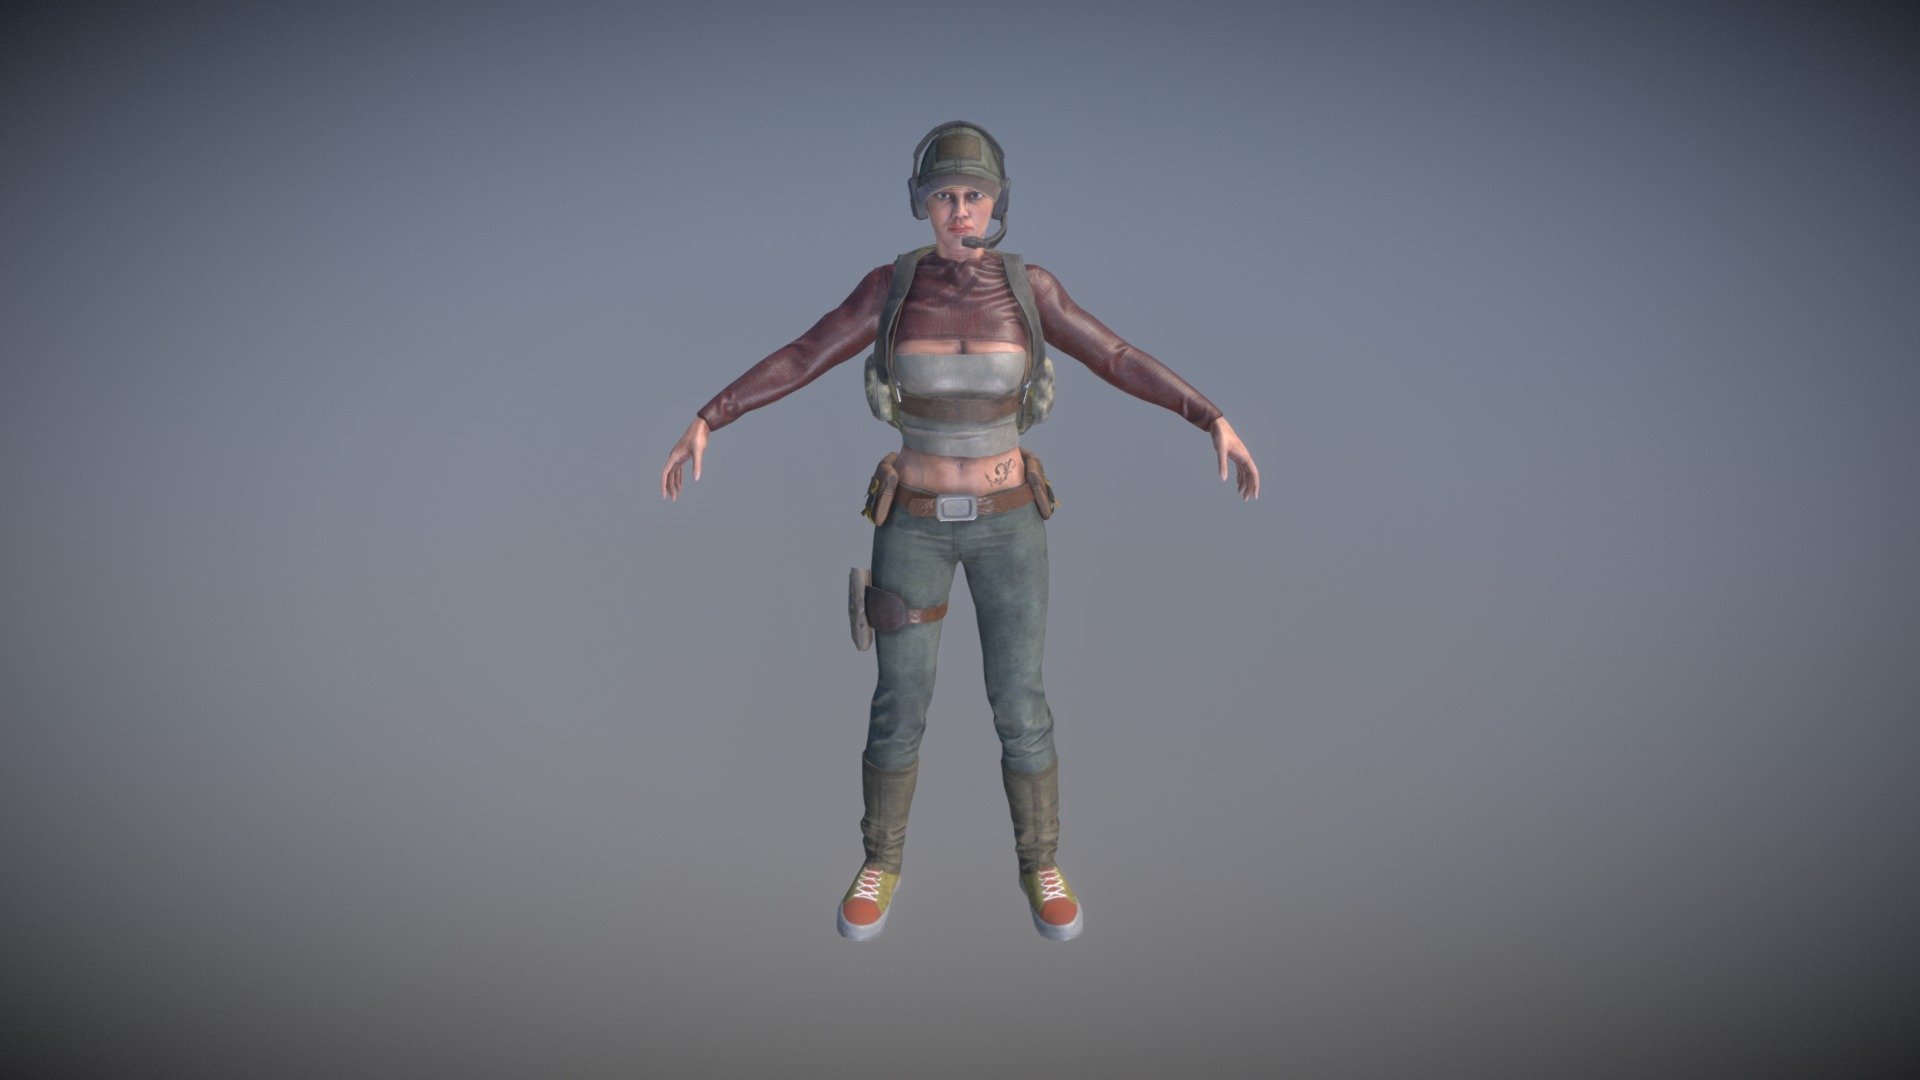 Package includes a Tpose Rigged Humanoid Character in FBX format, standard PBR textures, Unity PBR textures as well as Unreal PBR textures in 2k resolution. character is separated into 4 parts: backpack, head, clothes and pants. whole body is about 10k triangles, Backpack is 1.5k triangles 3d model